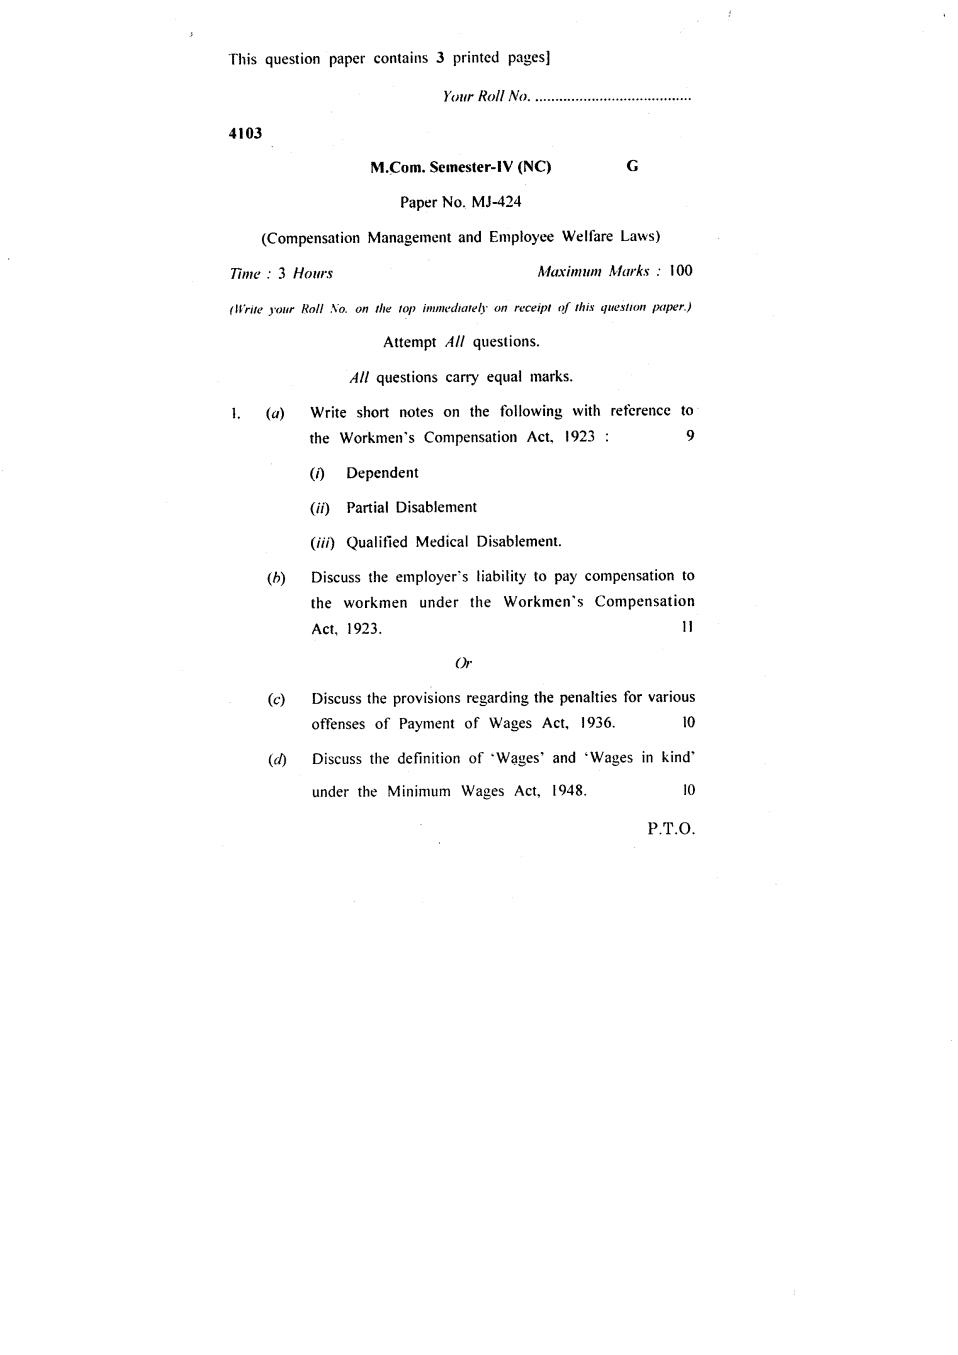 DU SOL M.Com Question Paper 2nd Year 2018 Sem 4 Compensation Management And Employee Welfare Laws - Page 1